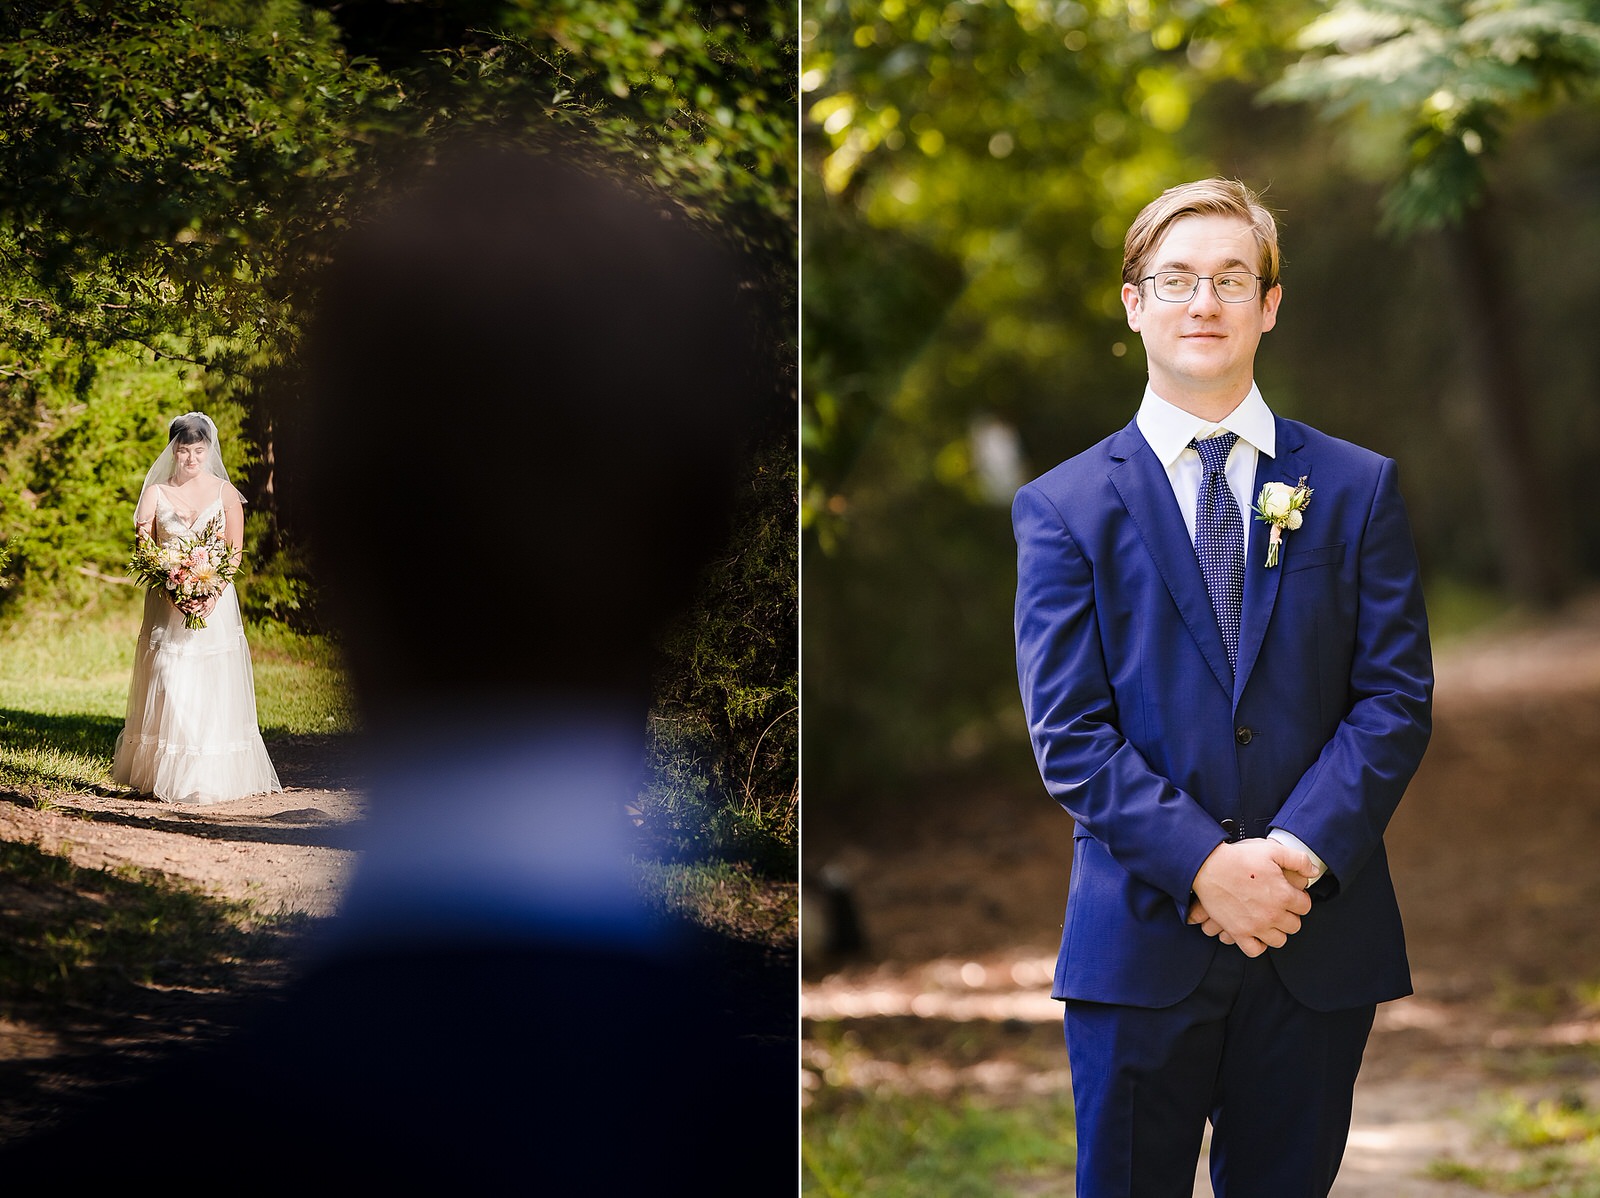 Bride and groom see one another for the first time on their wedding day